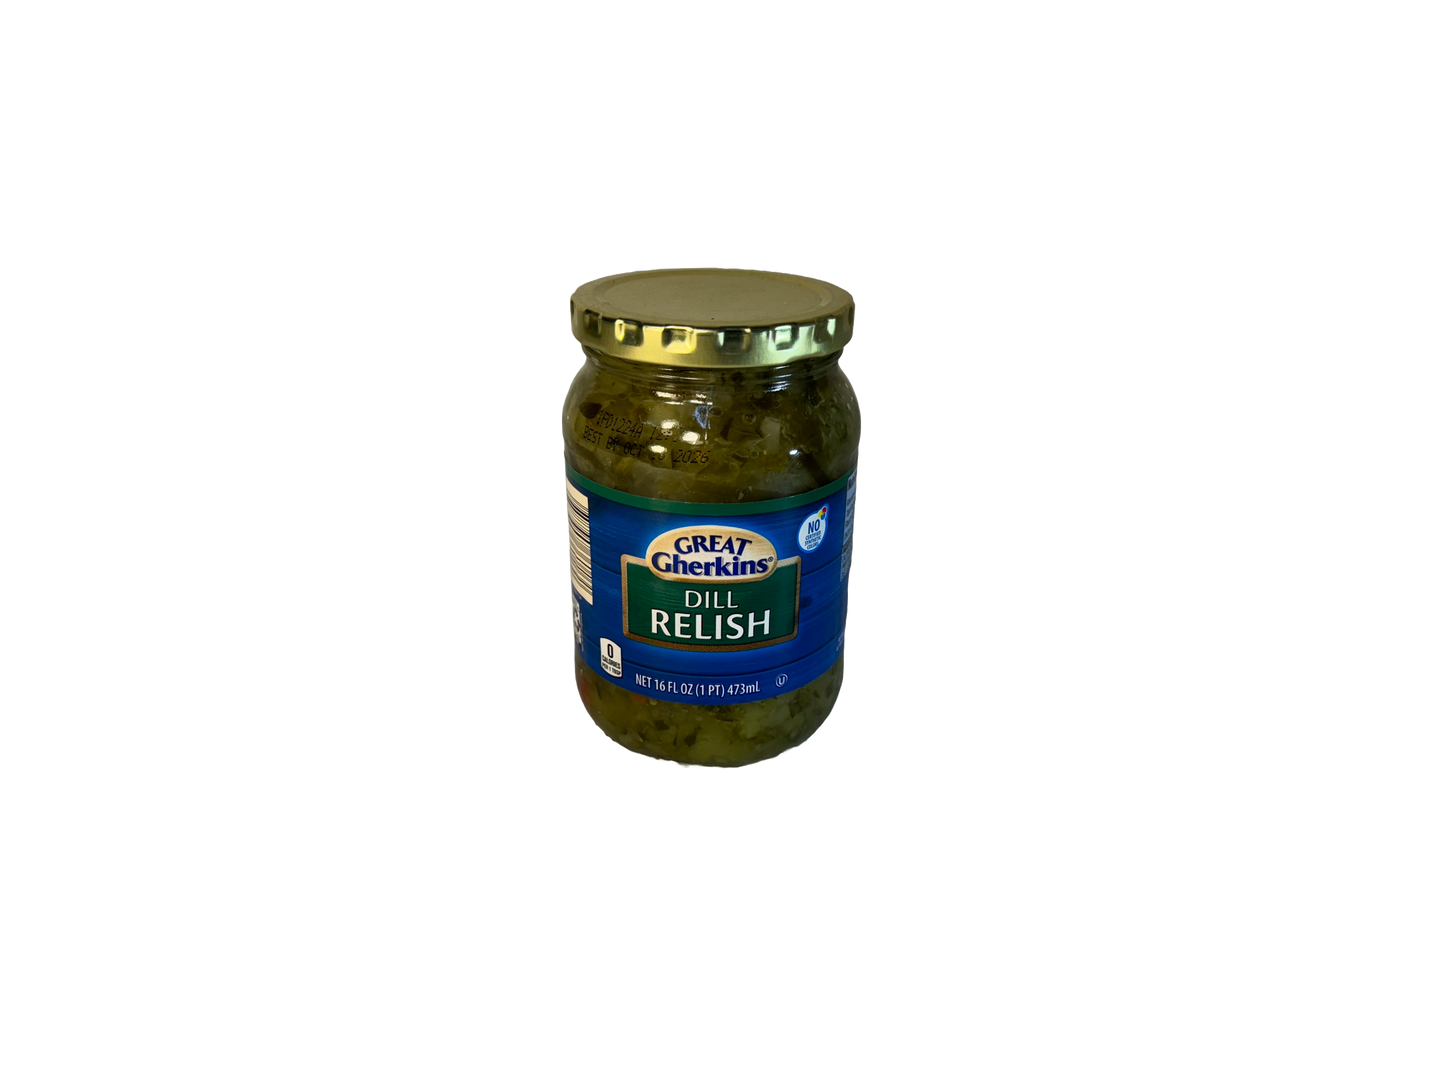 Great Gherkins Dill Relish, 16 oz